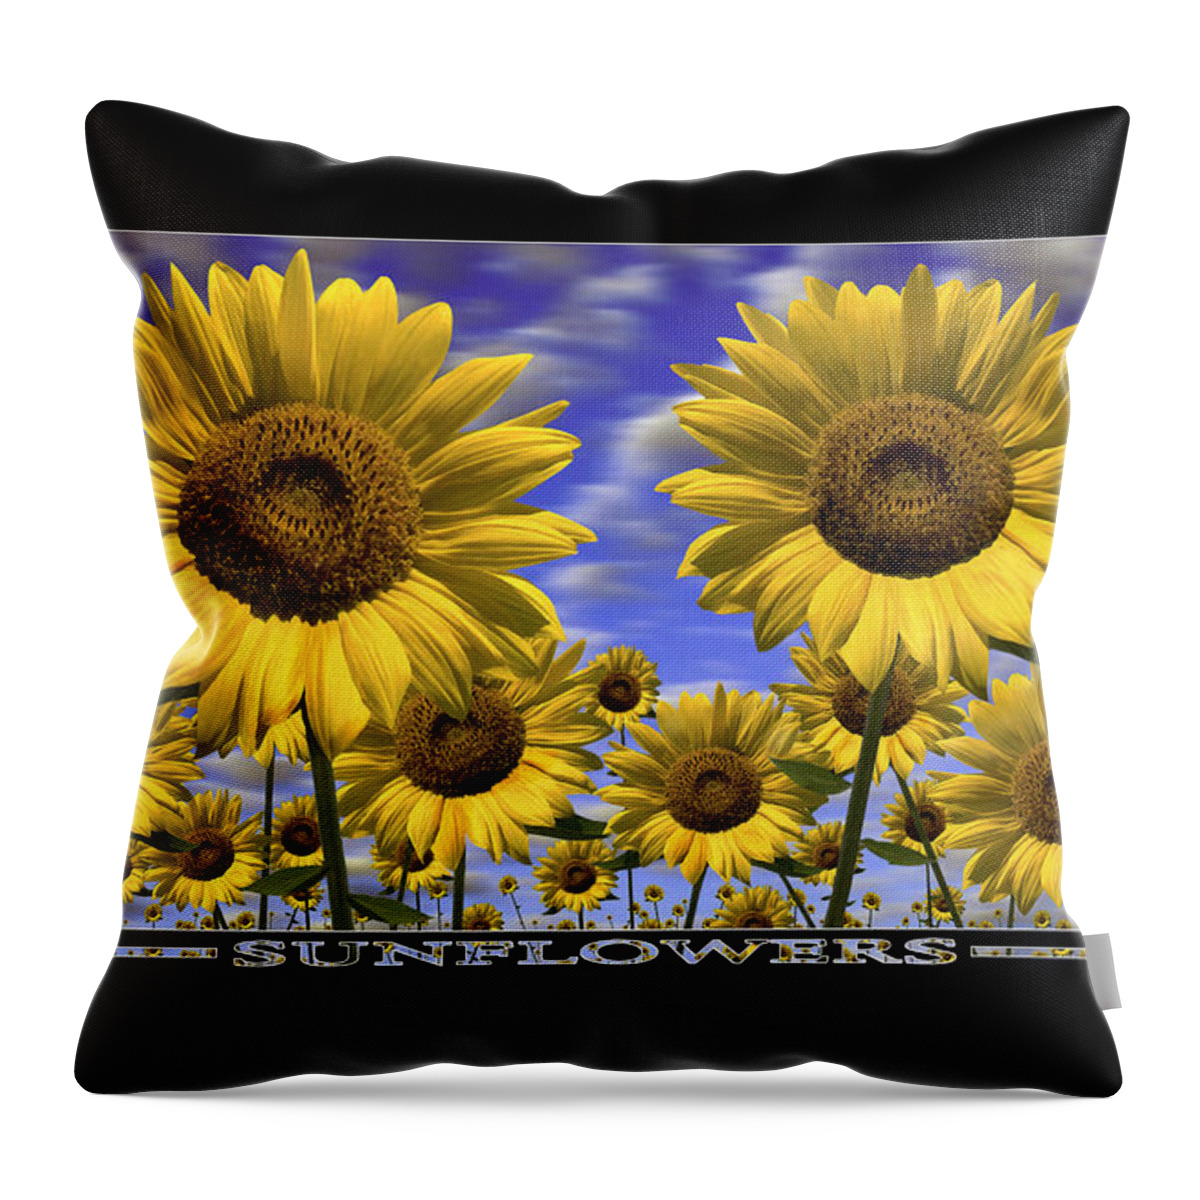 Flowers Throw Pillow featuring the photograph Sunflowers Show Print by Mike McGlothlen